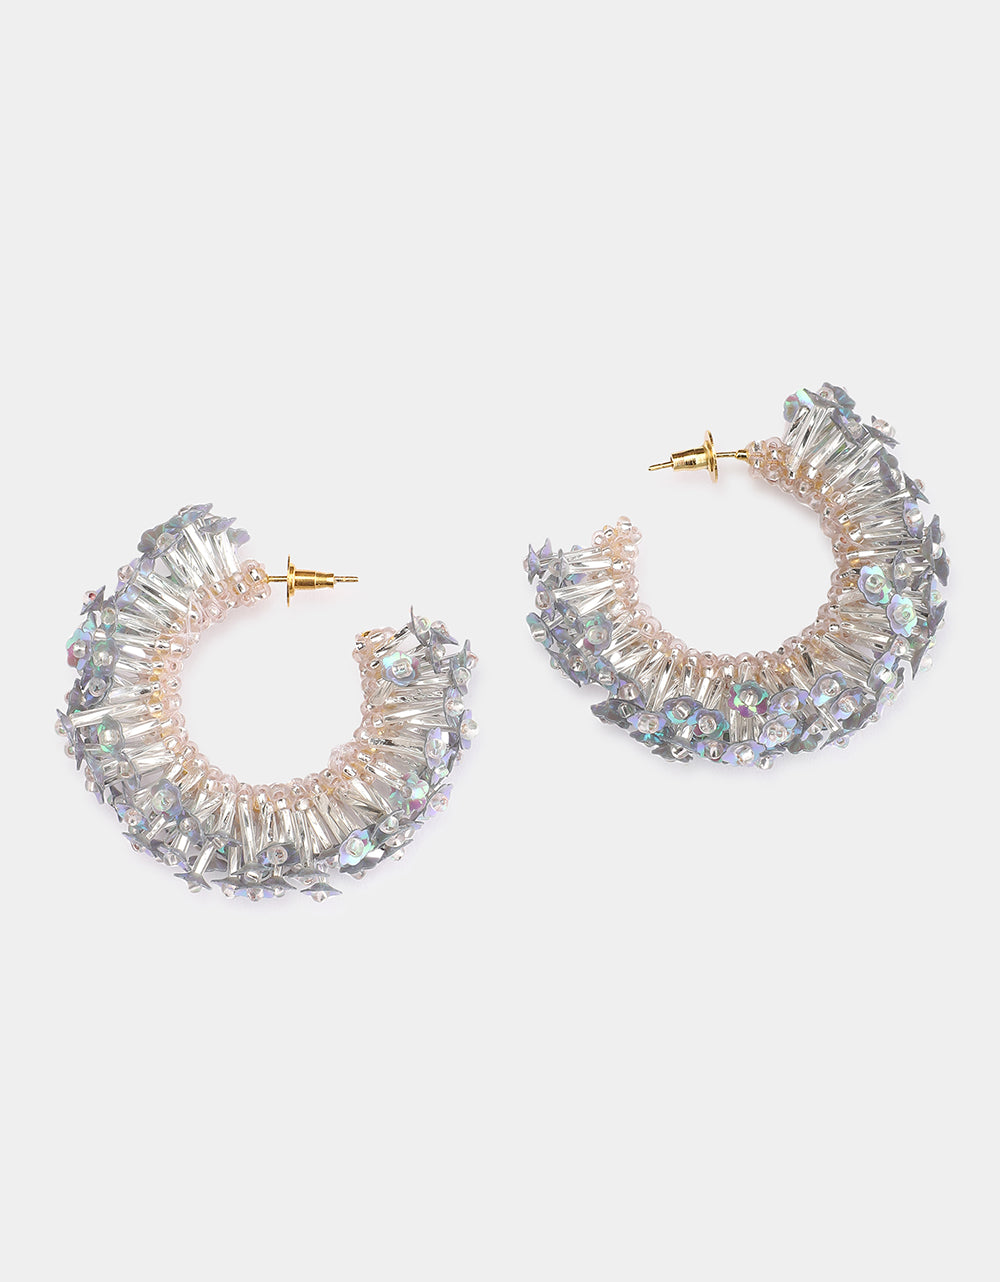 BOUCLES D'OREILLES BLOSSOM HOOPS SMALL